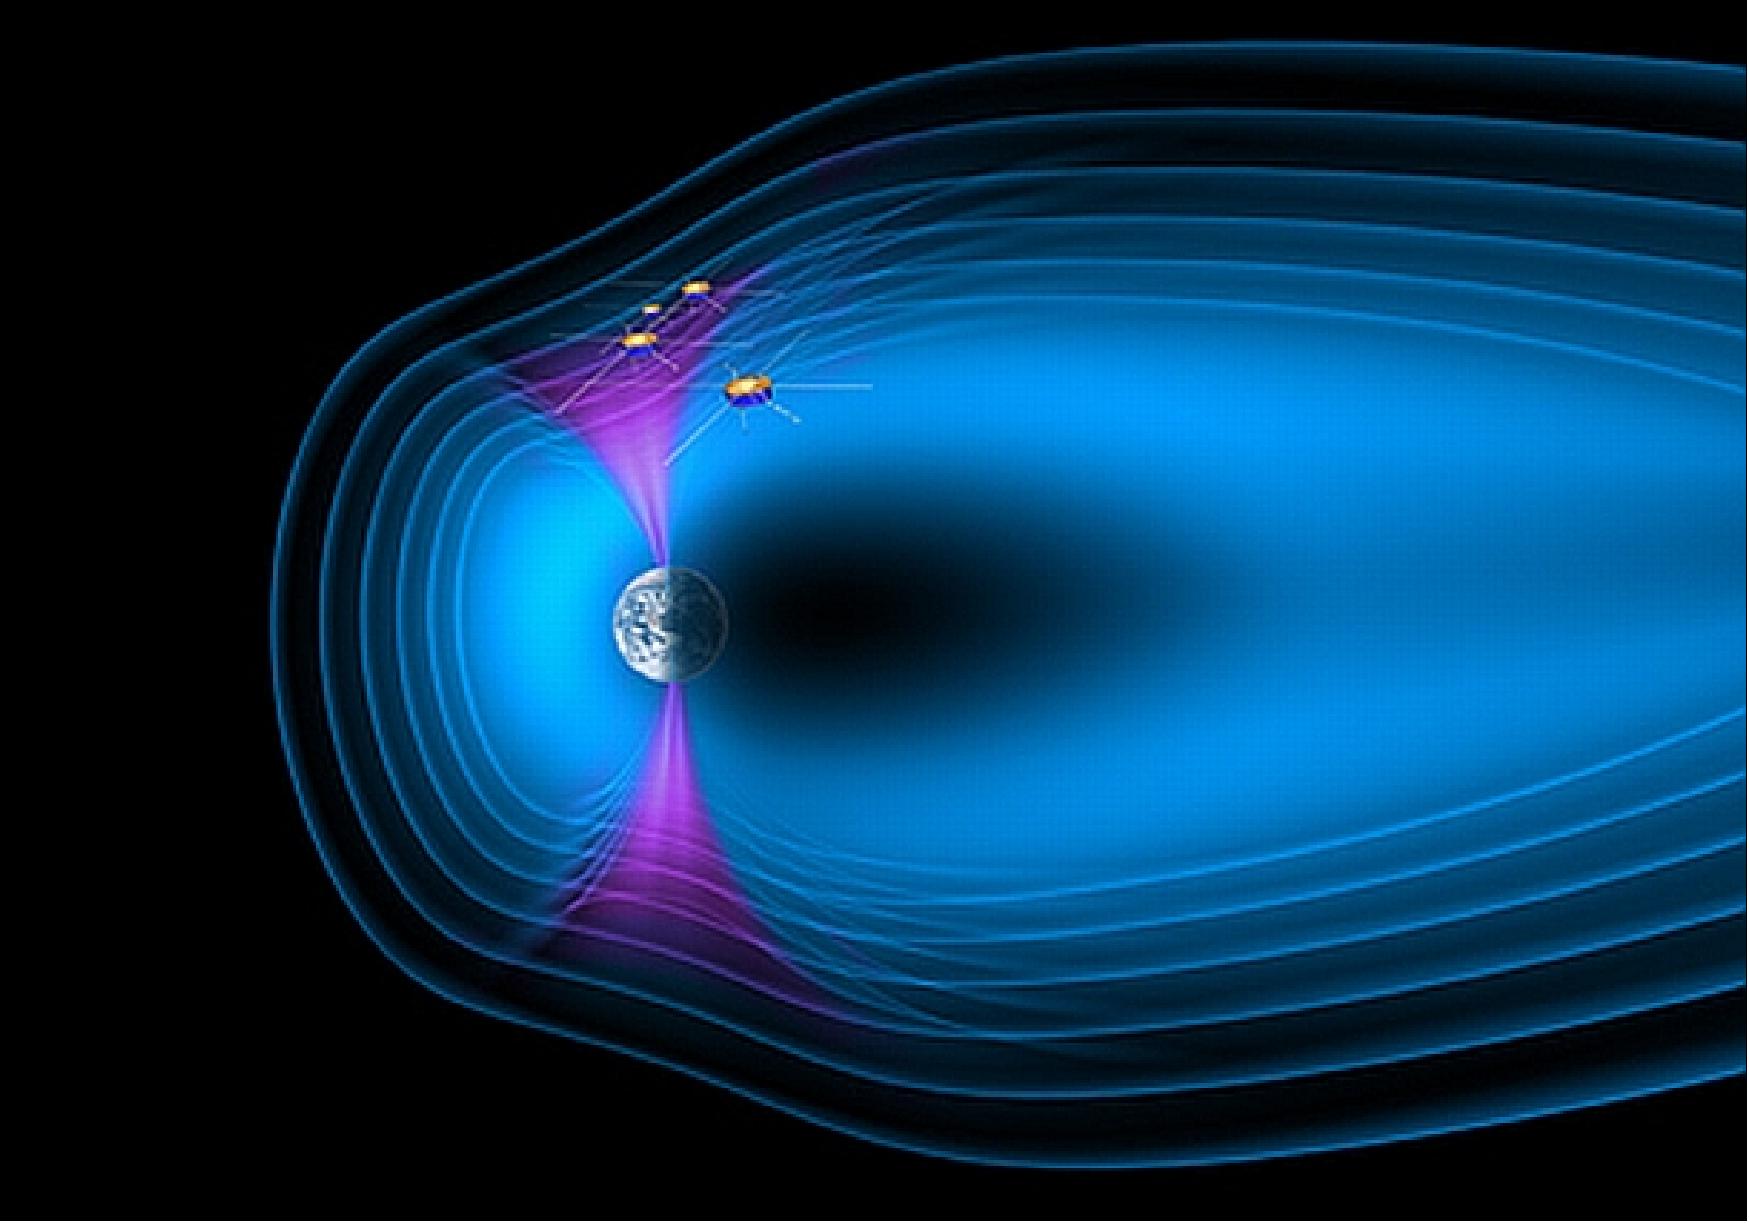 Figure 44: The four Cluster spacecraft crossing the northern cusp of Earth's magnetosphere (image credit: ESA/AOES Medialab)